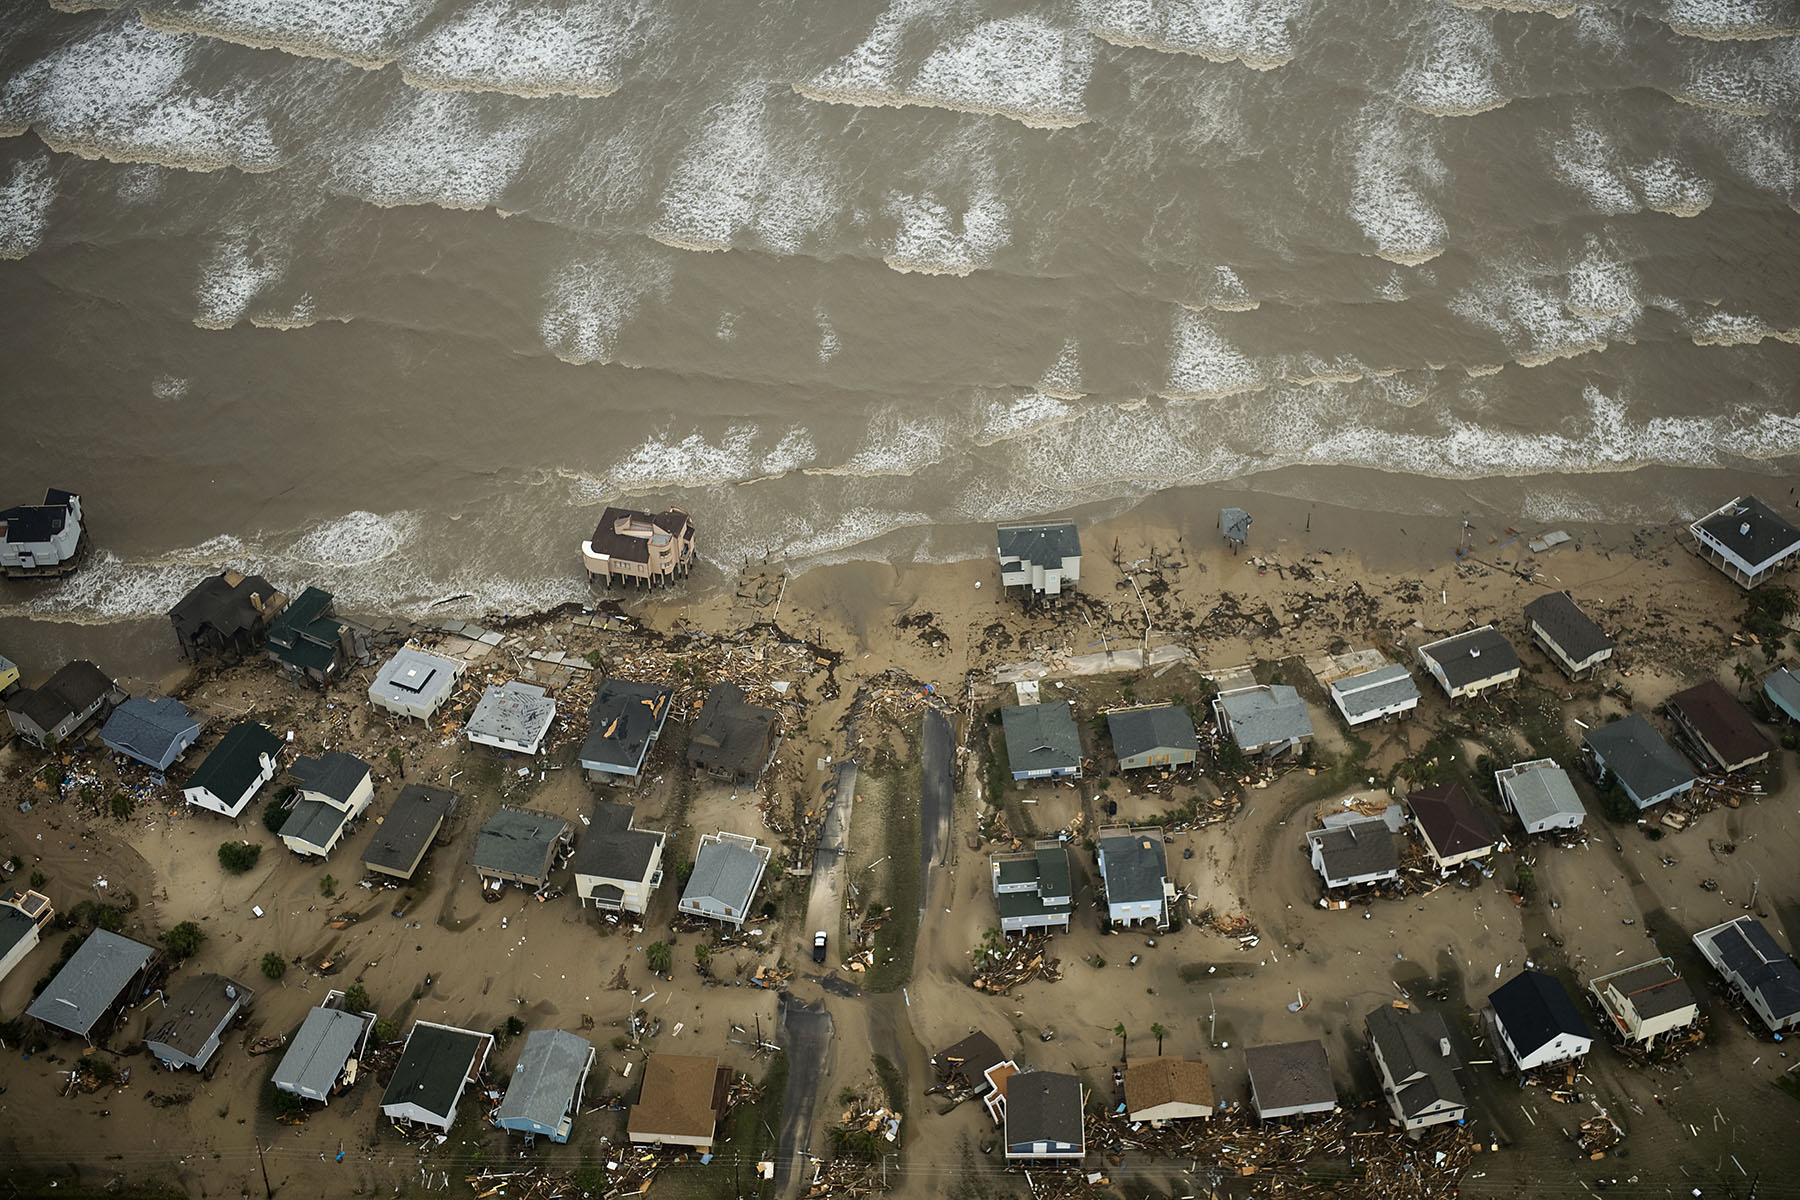 Damaged homes are seen on Galveston Island after the passing of Hurricane Ike in September 2008.